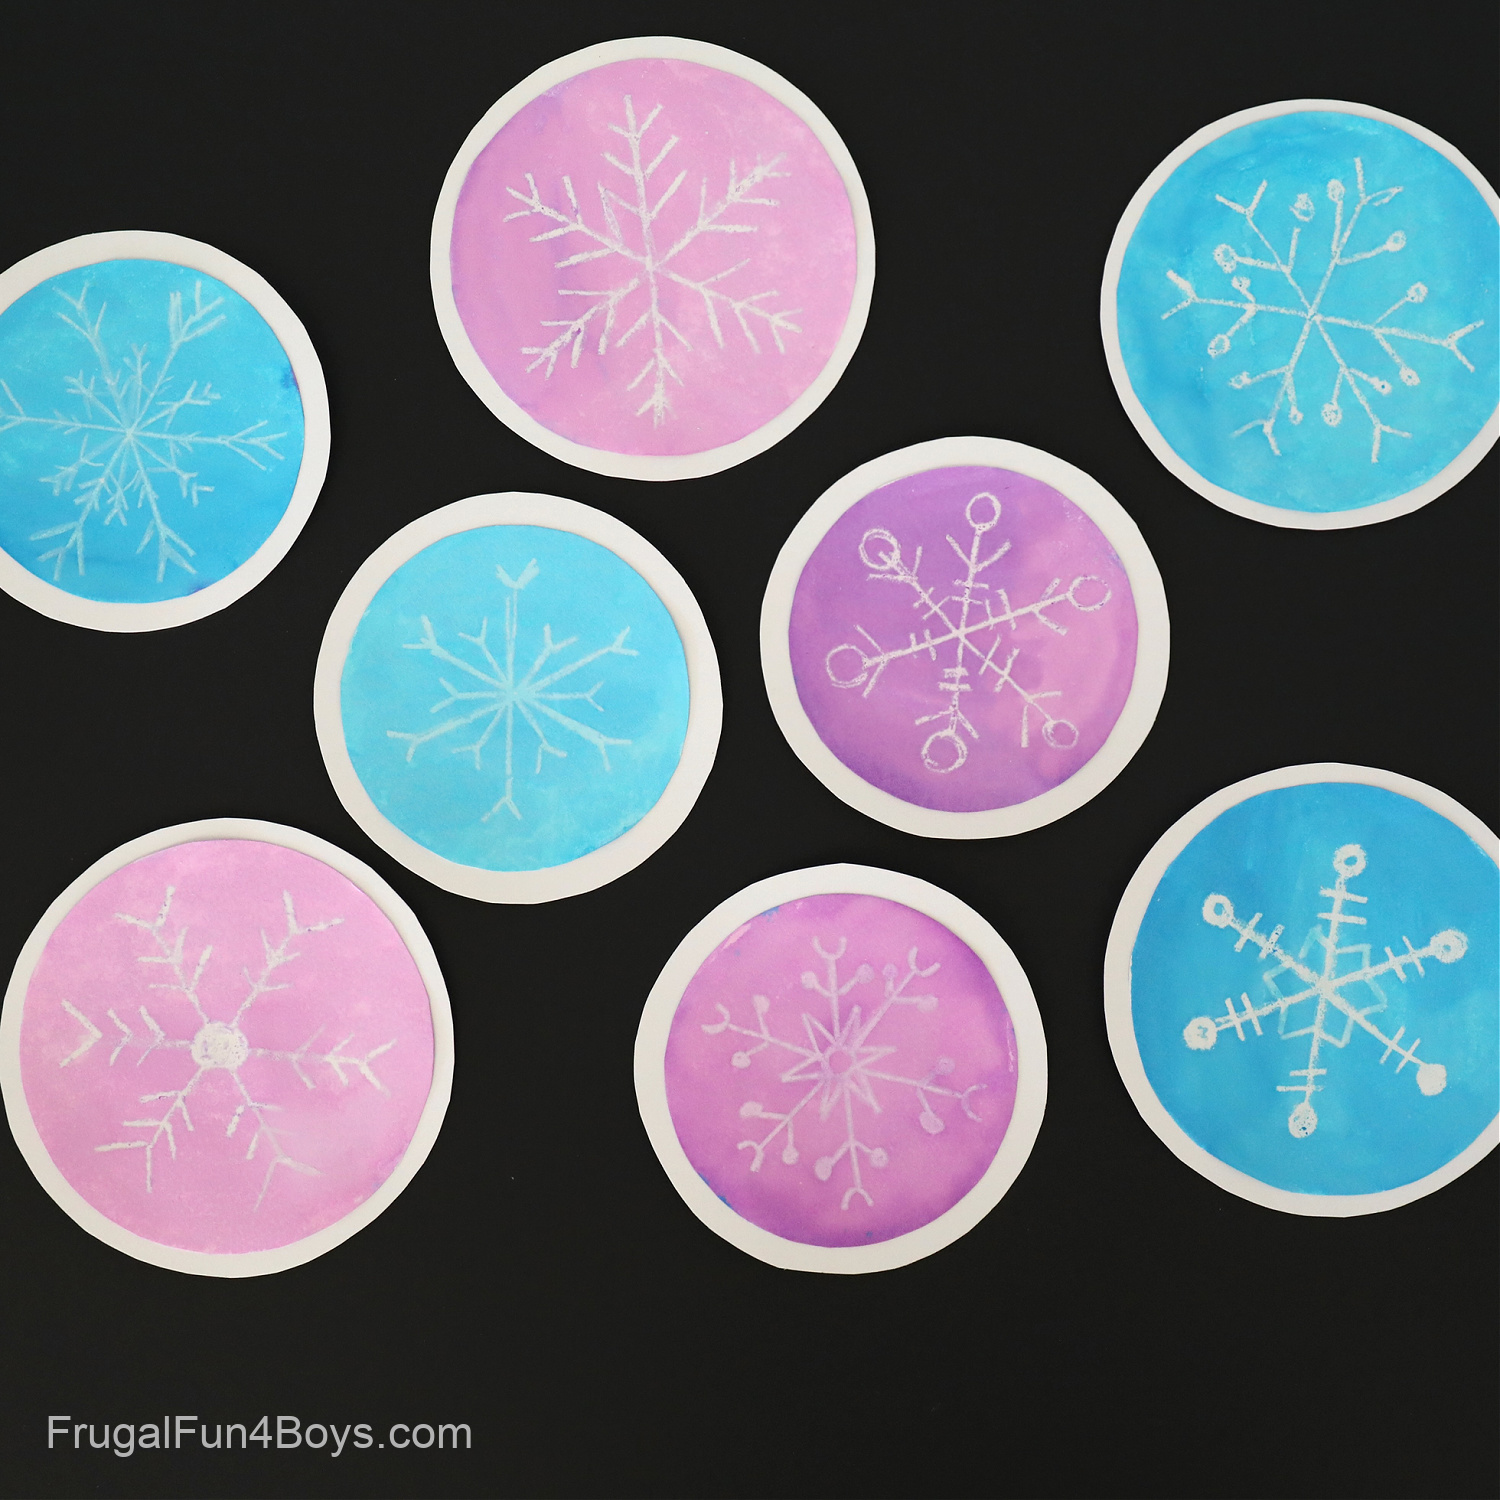 Watercolor and white crayon snowflakes - winter art project